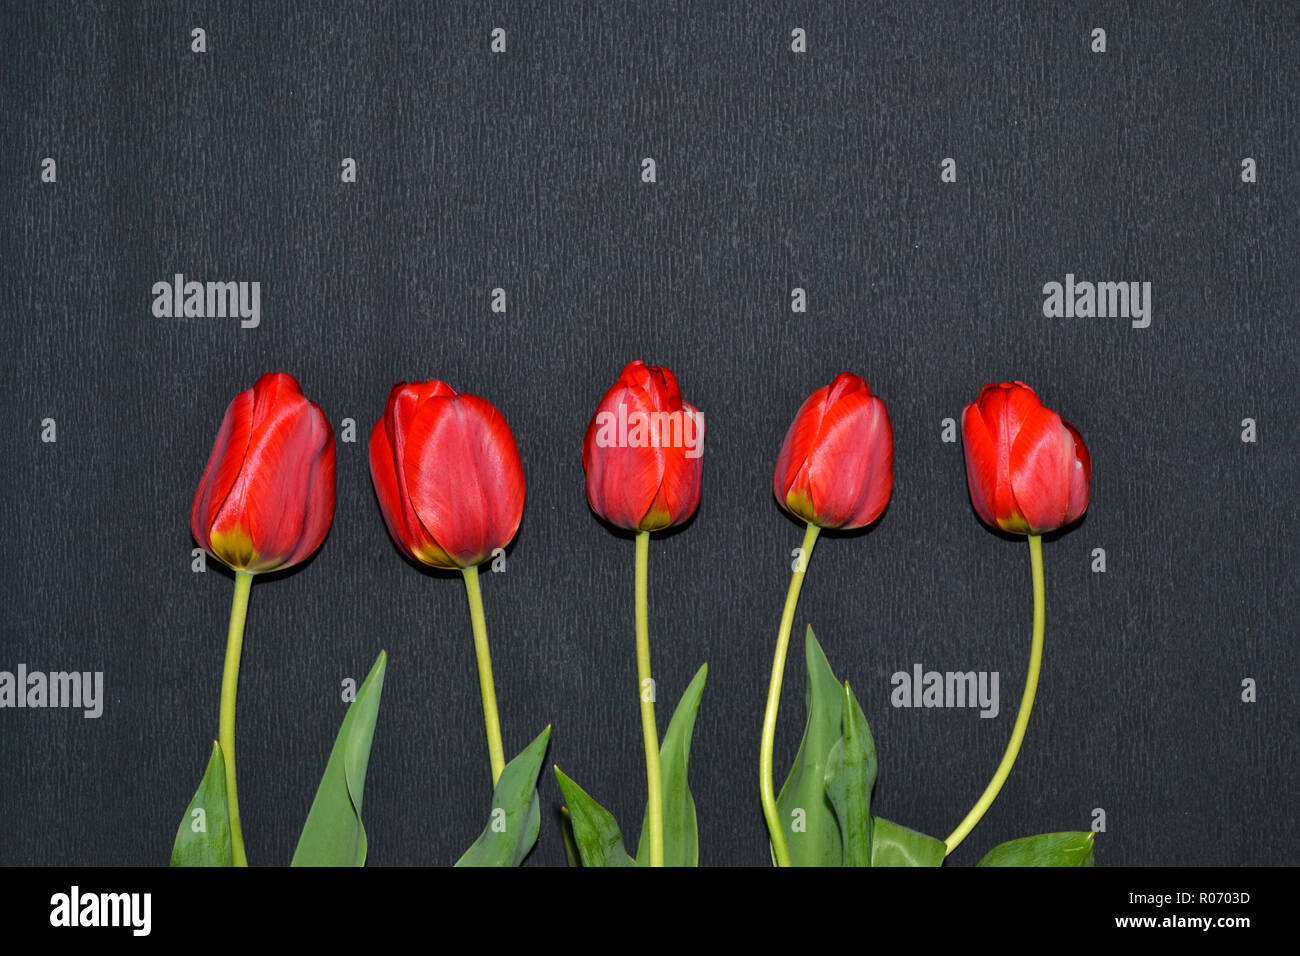 Flowers tulips on dark surface. A place for notes or embed images. Stock Photo